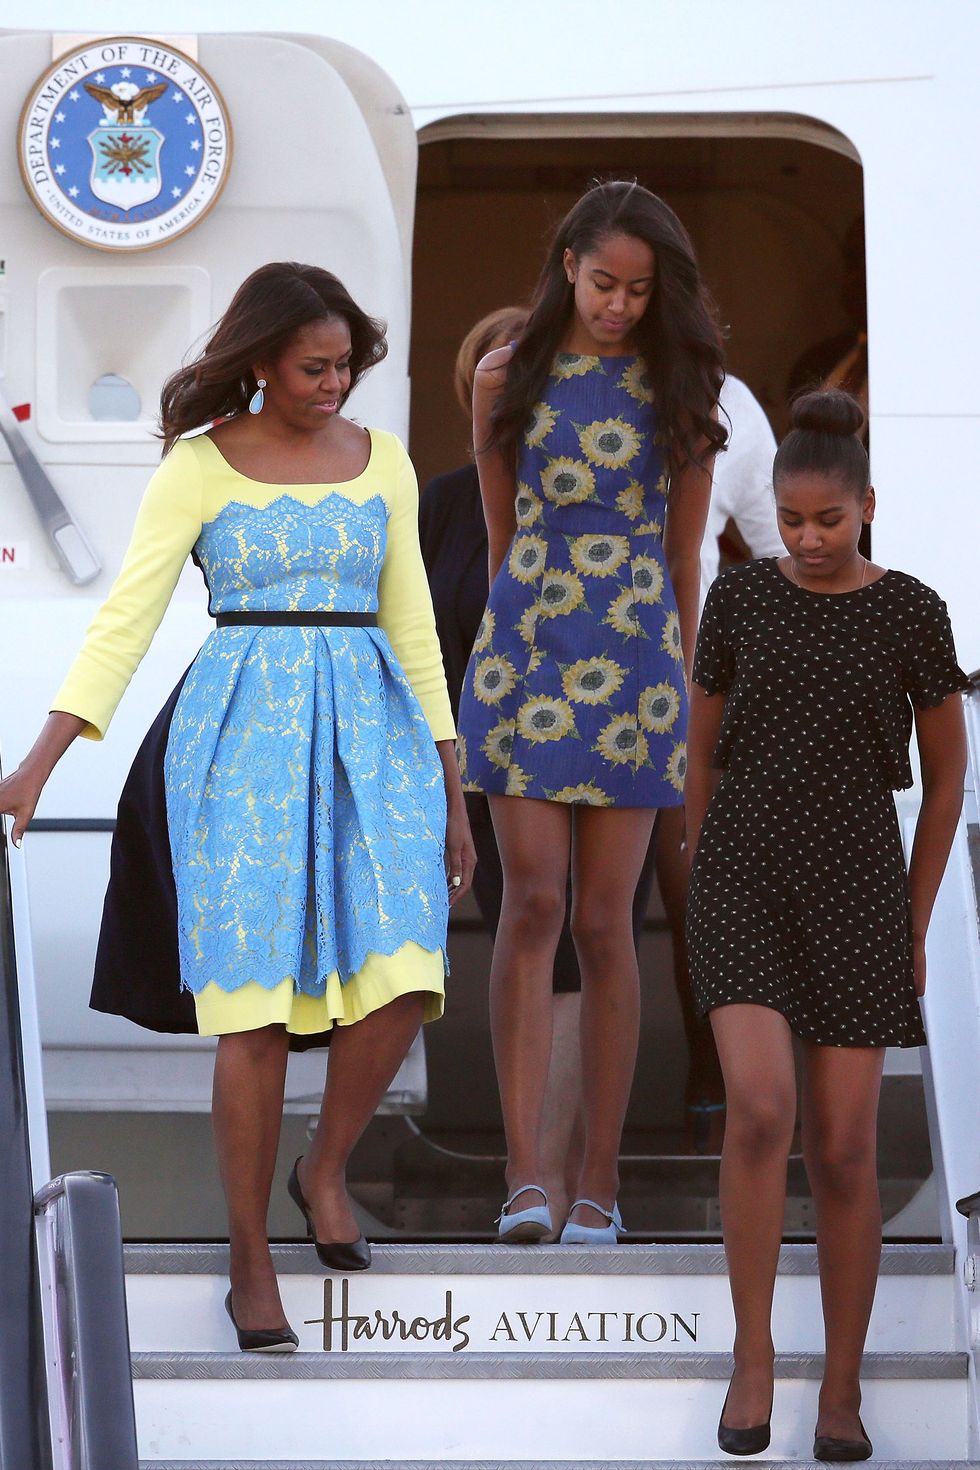 LONDON, ENGLAND - JUNE 15:  First Lady Michelle Obama arrives with daughters Malia Obama (C) and Sasha Obama (R) at Stanstead airport on June 15, 2015 in London, England. The First Lady is travelling to London with her daughters, Malia and Sasha and her mother, Mrs. Marian Robinson, to continue a global tour promoting her Let Girls Learn Initiative.† During the visit she will meet with students at a girl's school to discuss how the UK and U.S. are working together to expand girl's education around the world.  (Photo by Dan Kitwood/Getty Images)